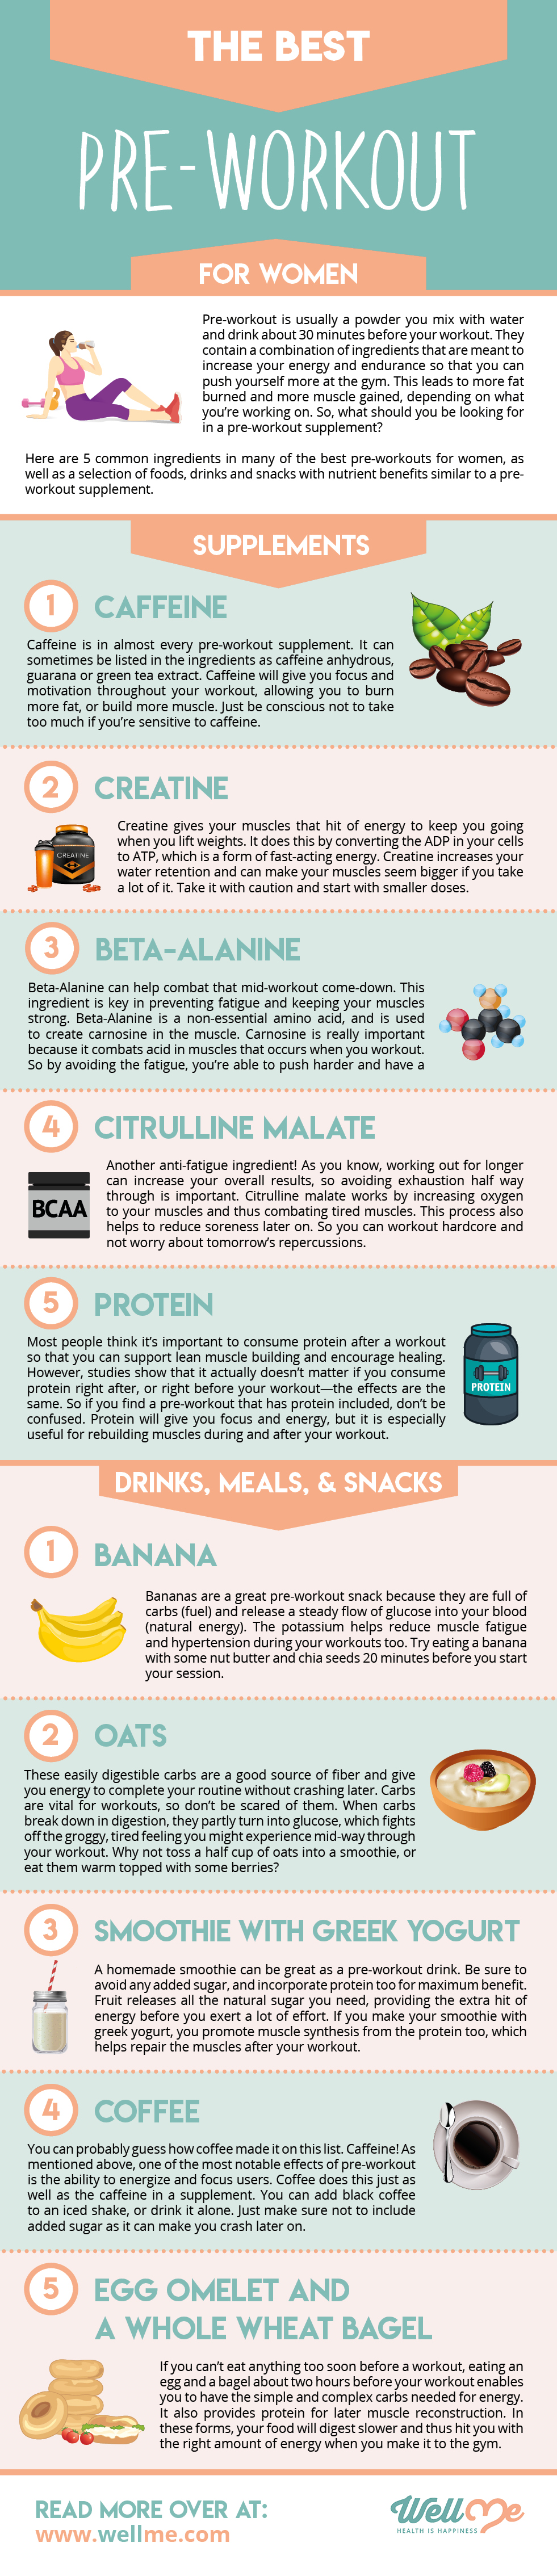 The Best Pre-Workout For Women Infographic